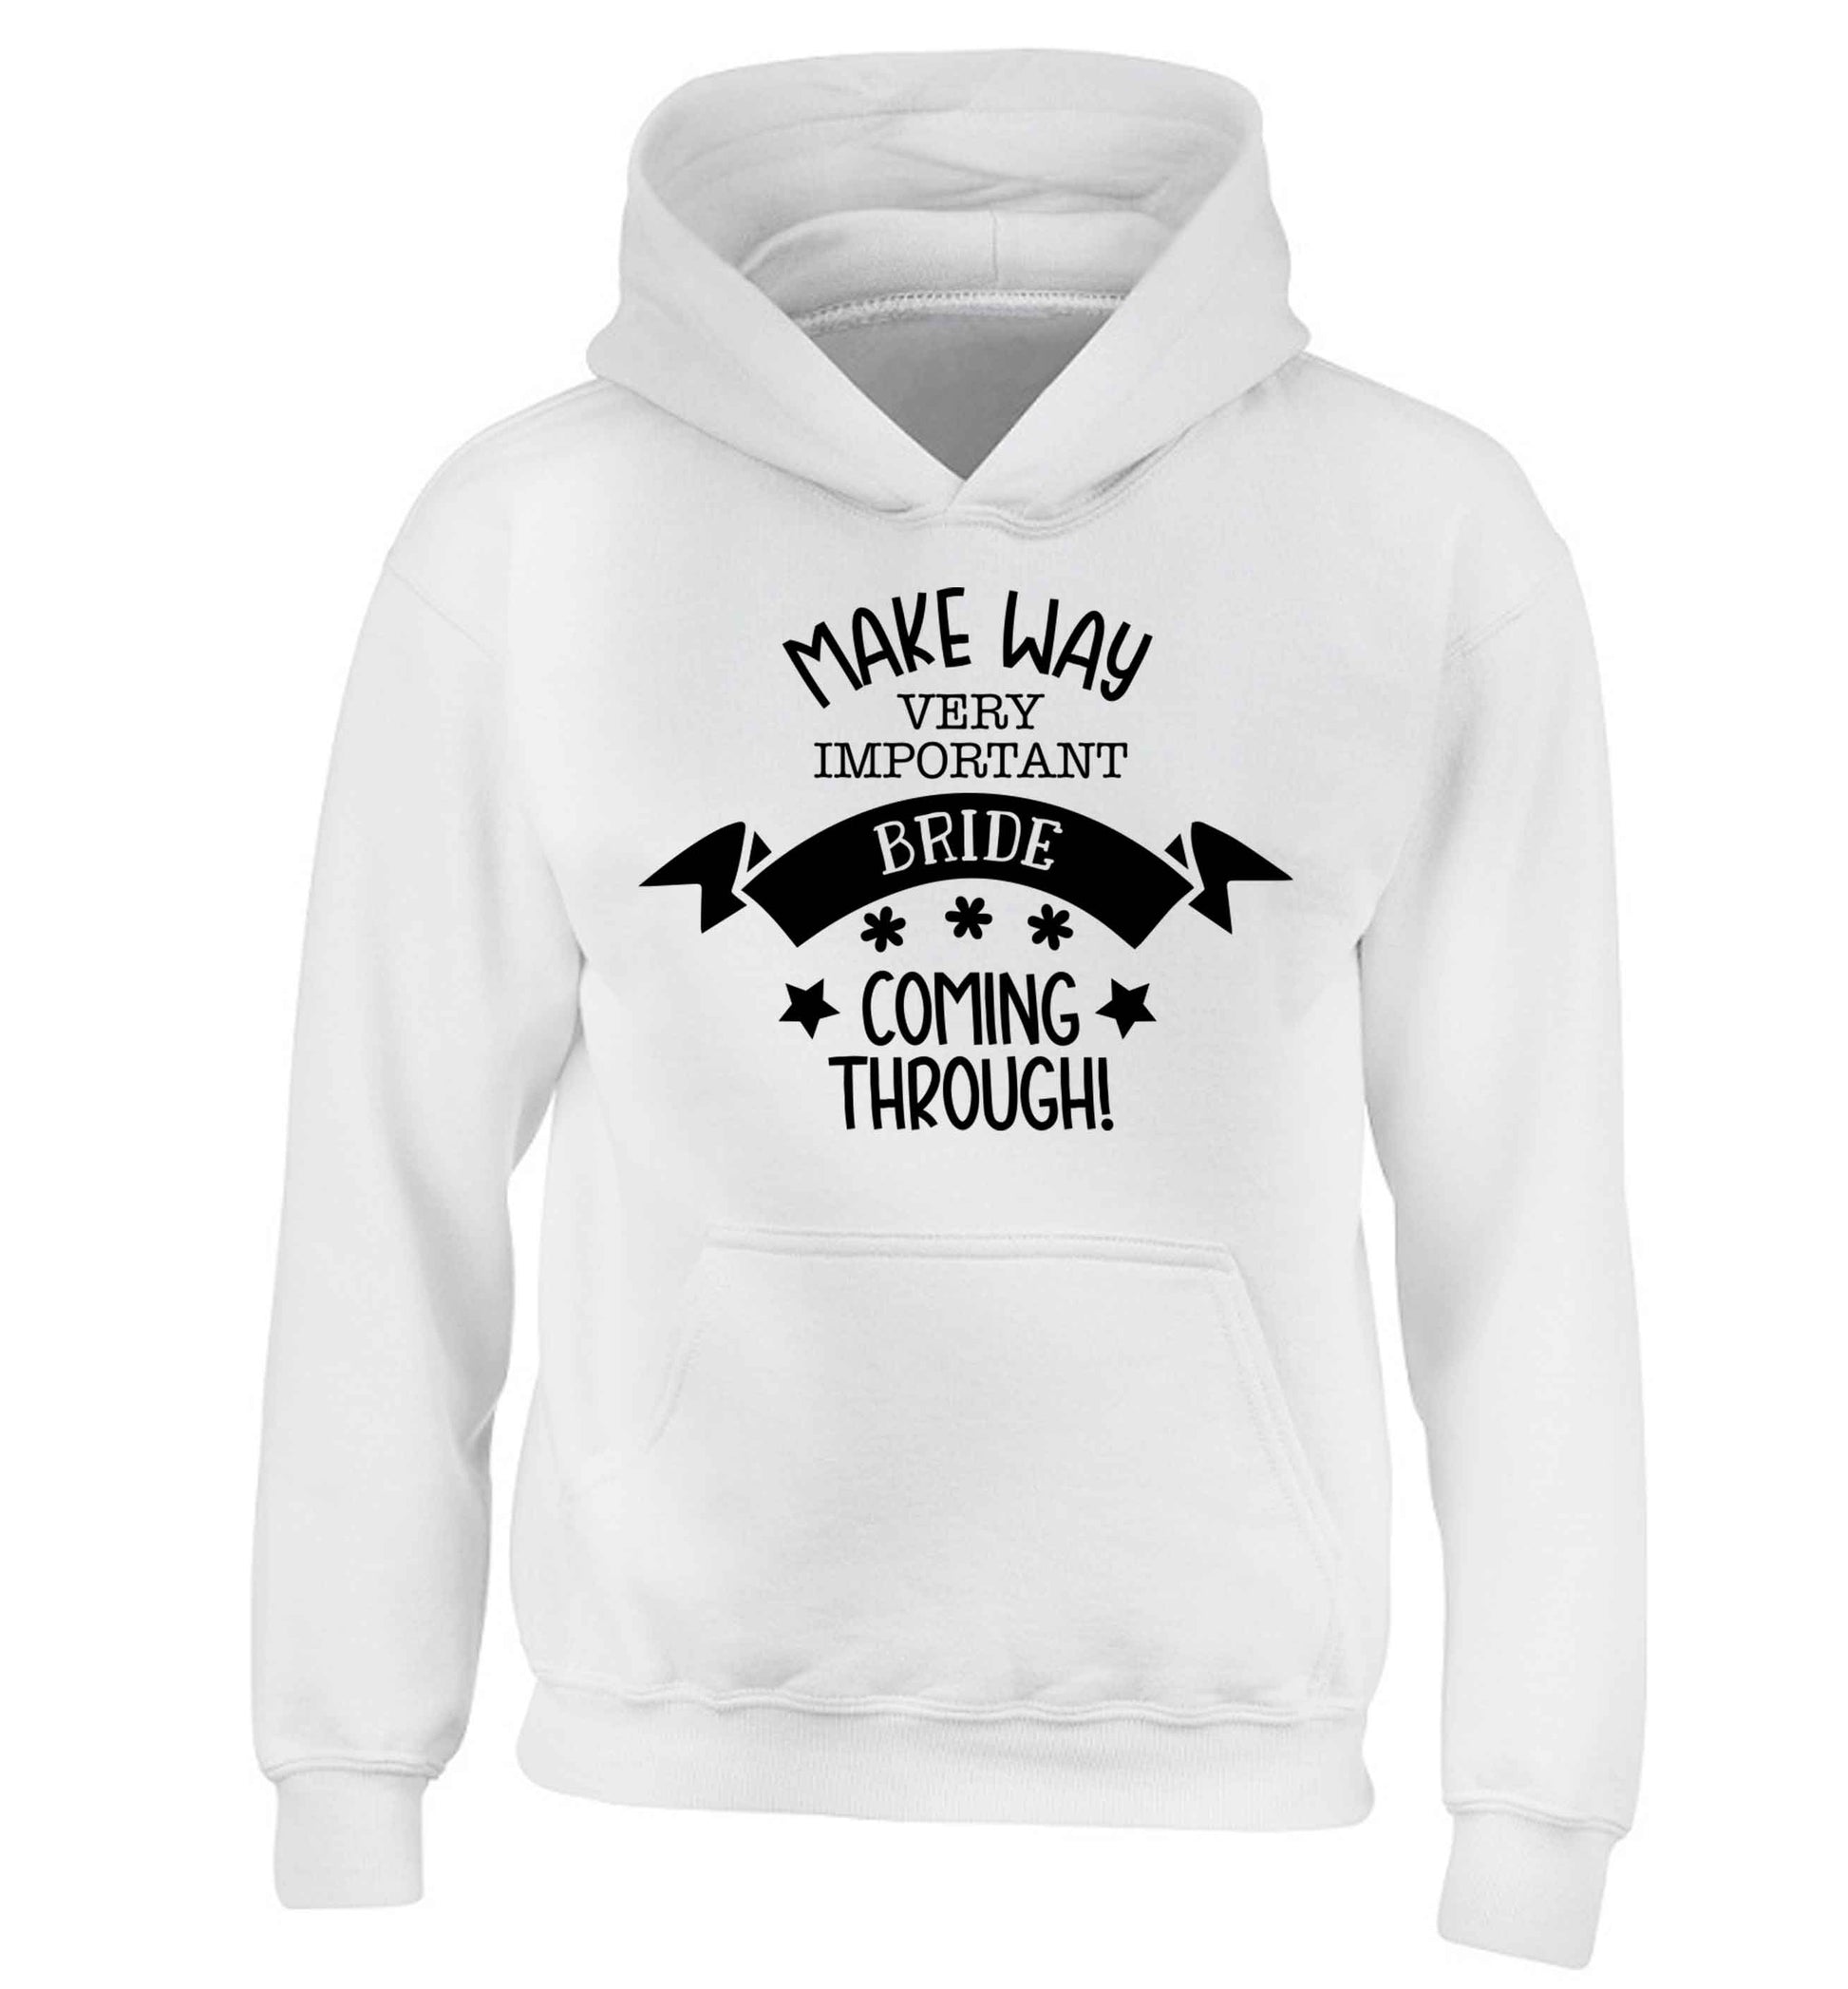 Make way V.I.P very important bride coming through! children's white hoodie 12-13 Years